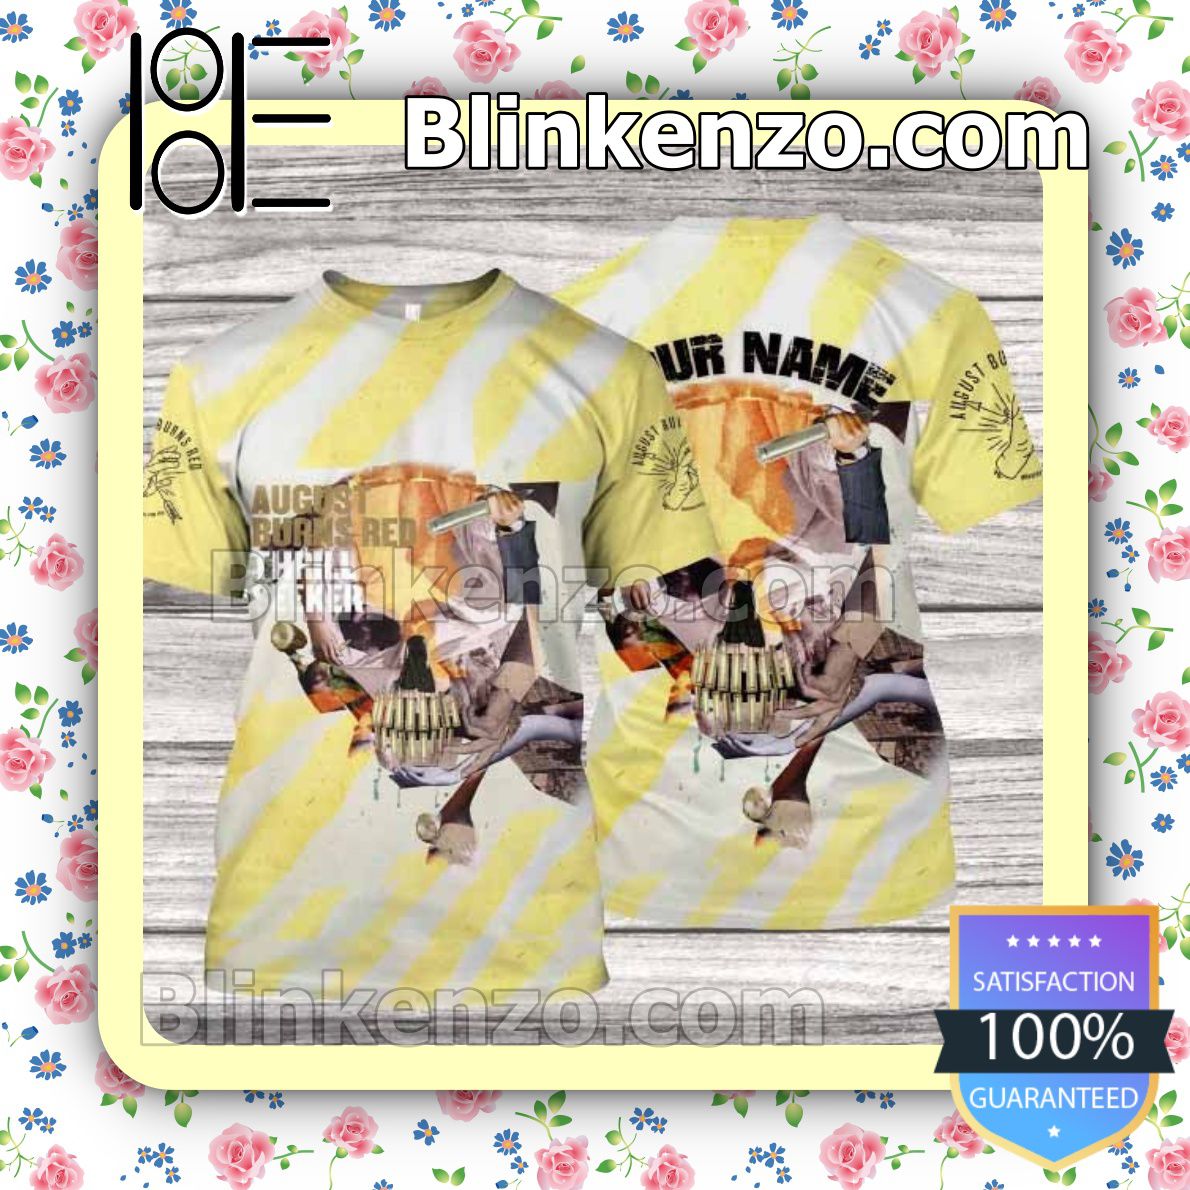 Personalized August Burns Red Thrill Seeker Album Cover Custom T-shirts